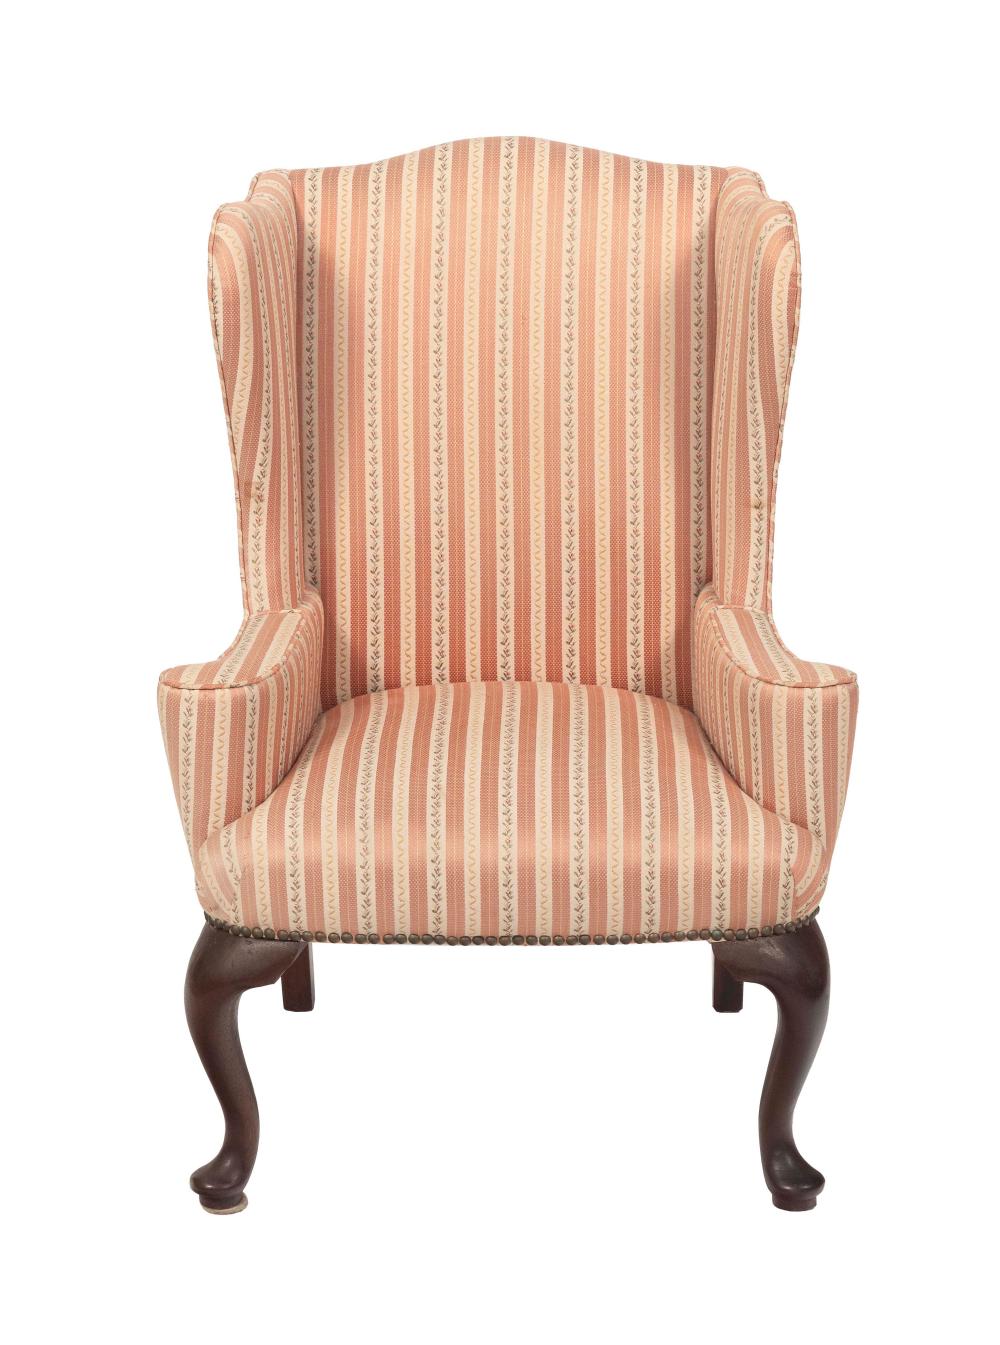 CHILD S WING CHAIR 19TH CENTURY 2f1d35